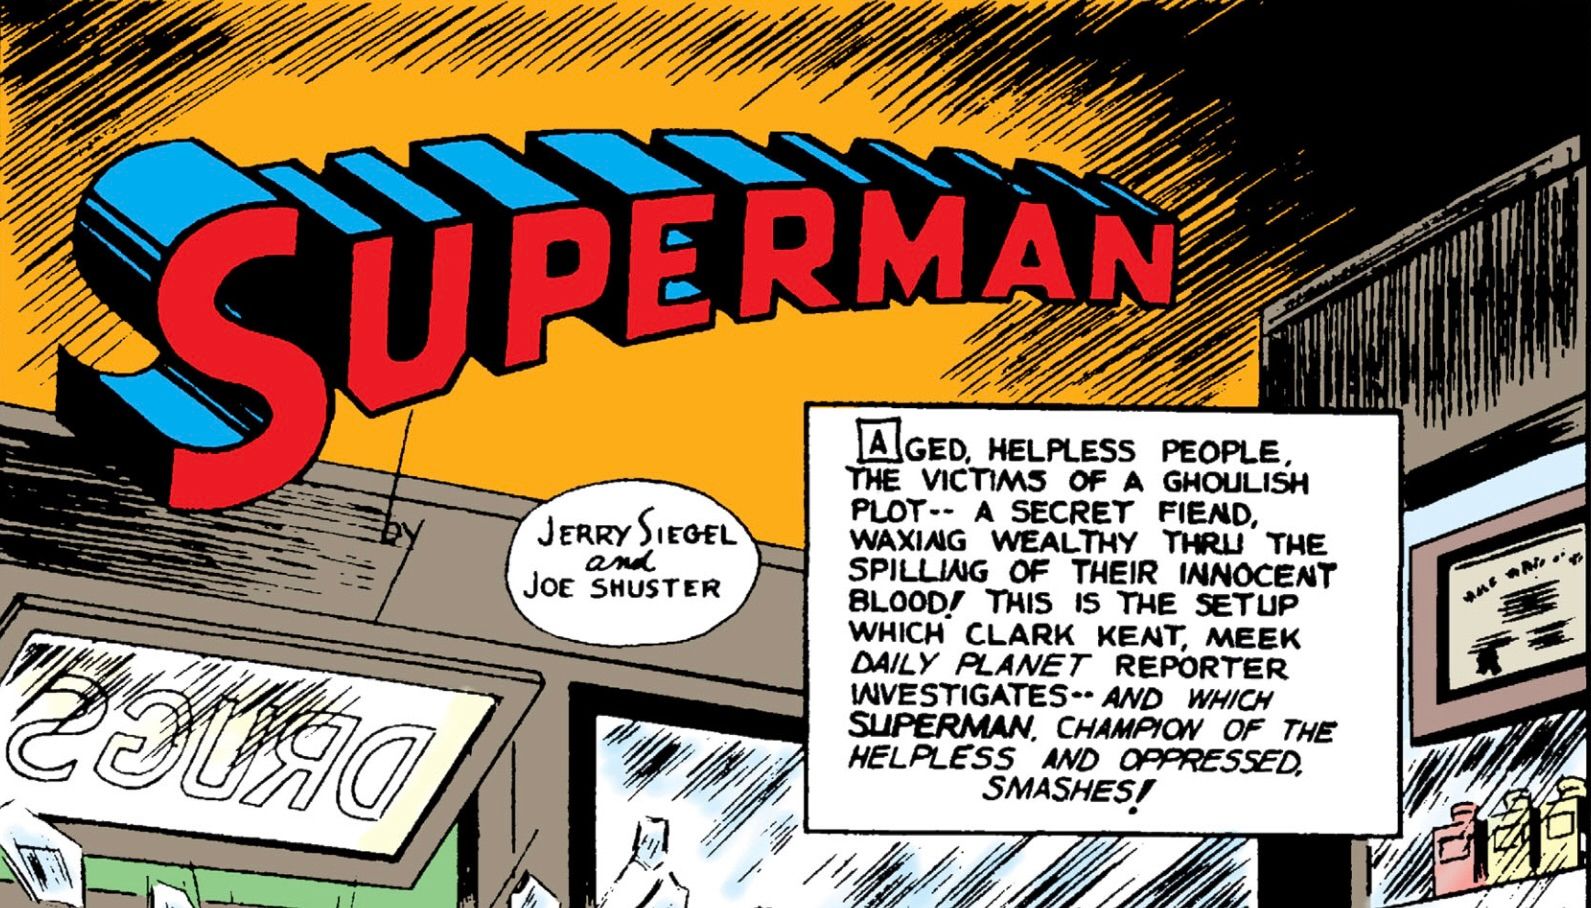 the first panel of Action Comics #29. Text reads AGED, HELPLESS PeOPLe,THE VICTIMS OF a GHOULISH PLOT – A SECRET FIEND WAXING WEALTHY THRU THE SPILLING OF THEIR INNOCENT BLOOD THIS IS THE SETUP WHICH CLARK KENT, MEEK DAILY PLANET REPORTER INVESTIGATES– AND WHICH SUPERMAN, CHAMPION OF THE HELPLESS AND OPPRESSED, SMASHES!